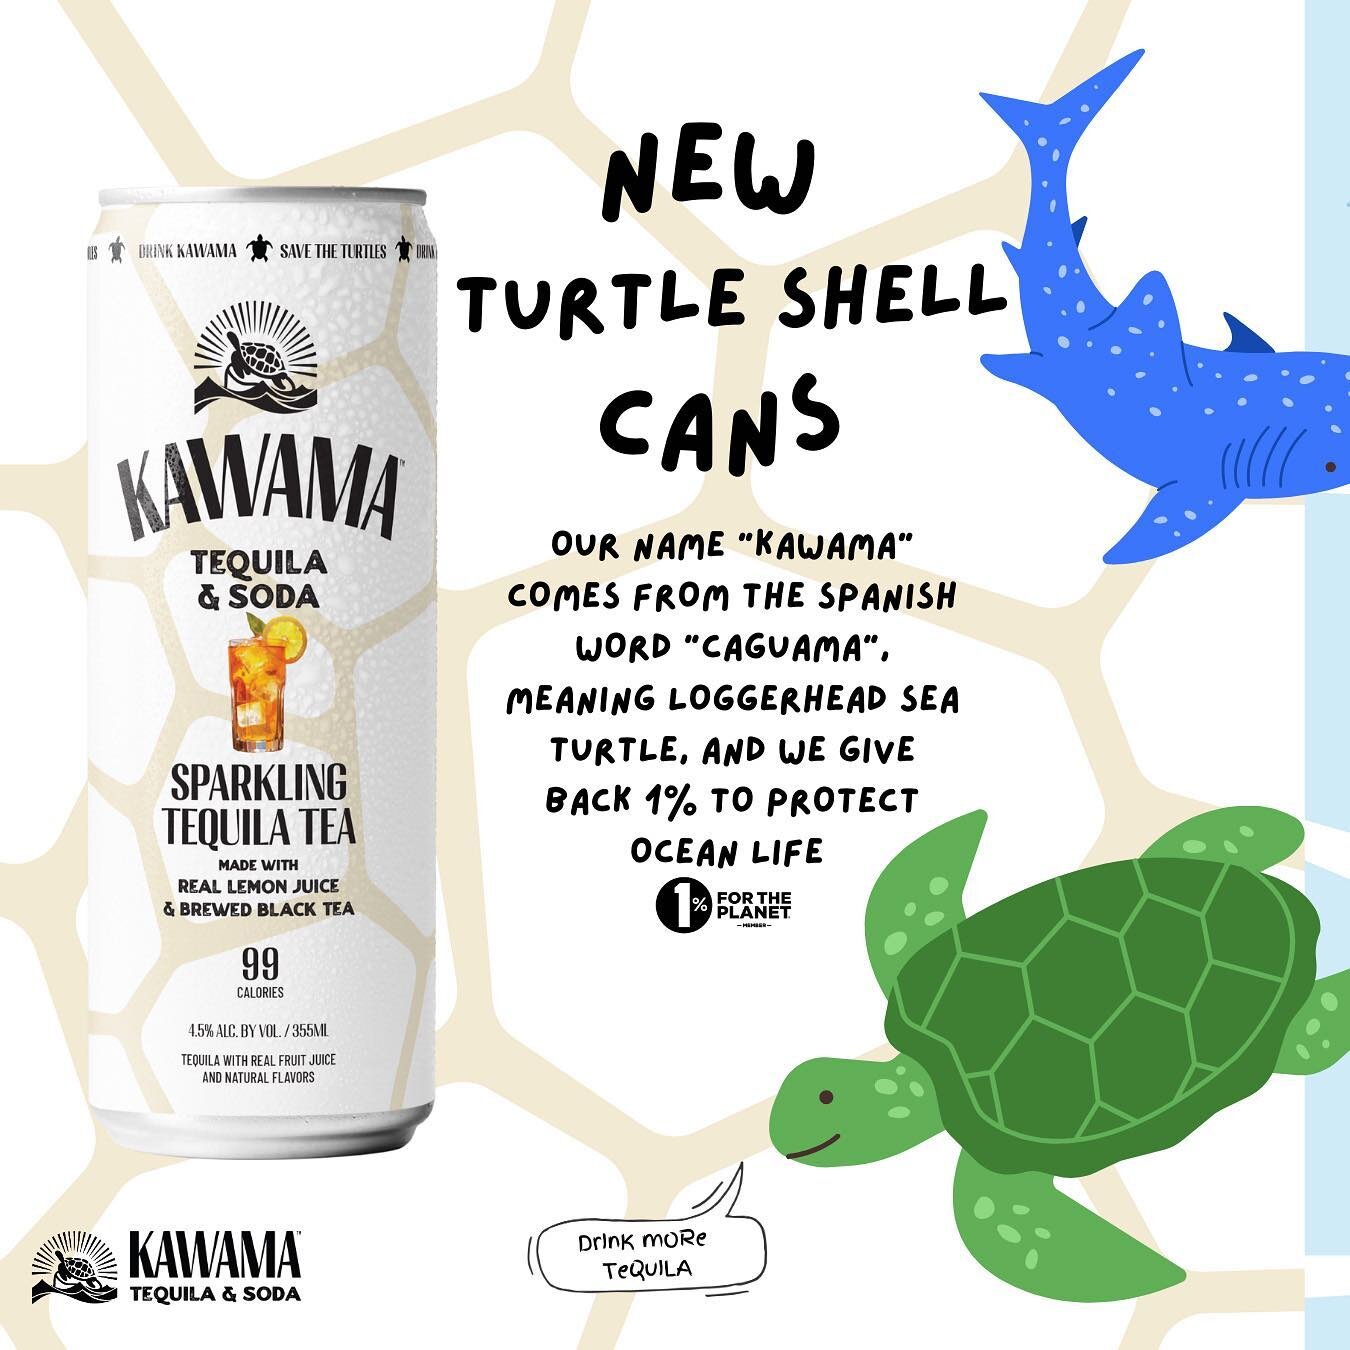 Your Kawama is getting a new look this Spring! We are updating all of our cans to feature our iconic sea turtle shell pattern 🐢 We are also adding Blood Orange to our Variety Pack🍊

Be on the lookout for the new packaging!!! Save the Turtles, Drink